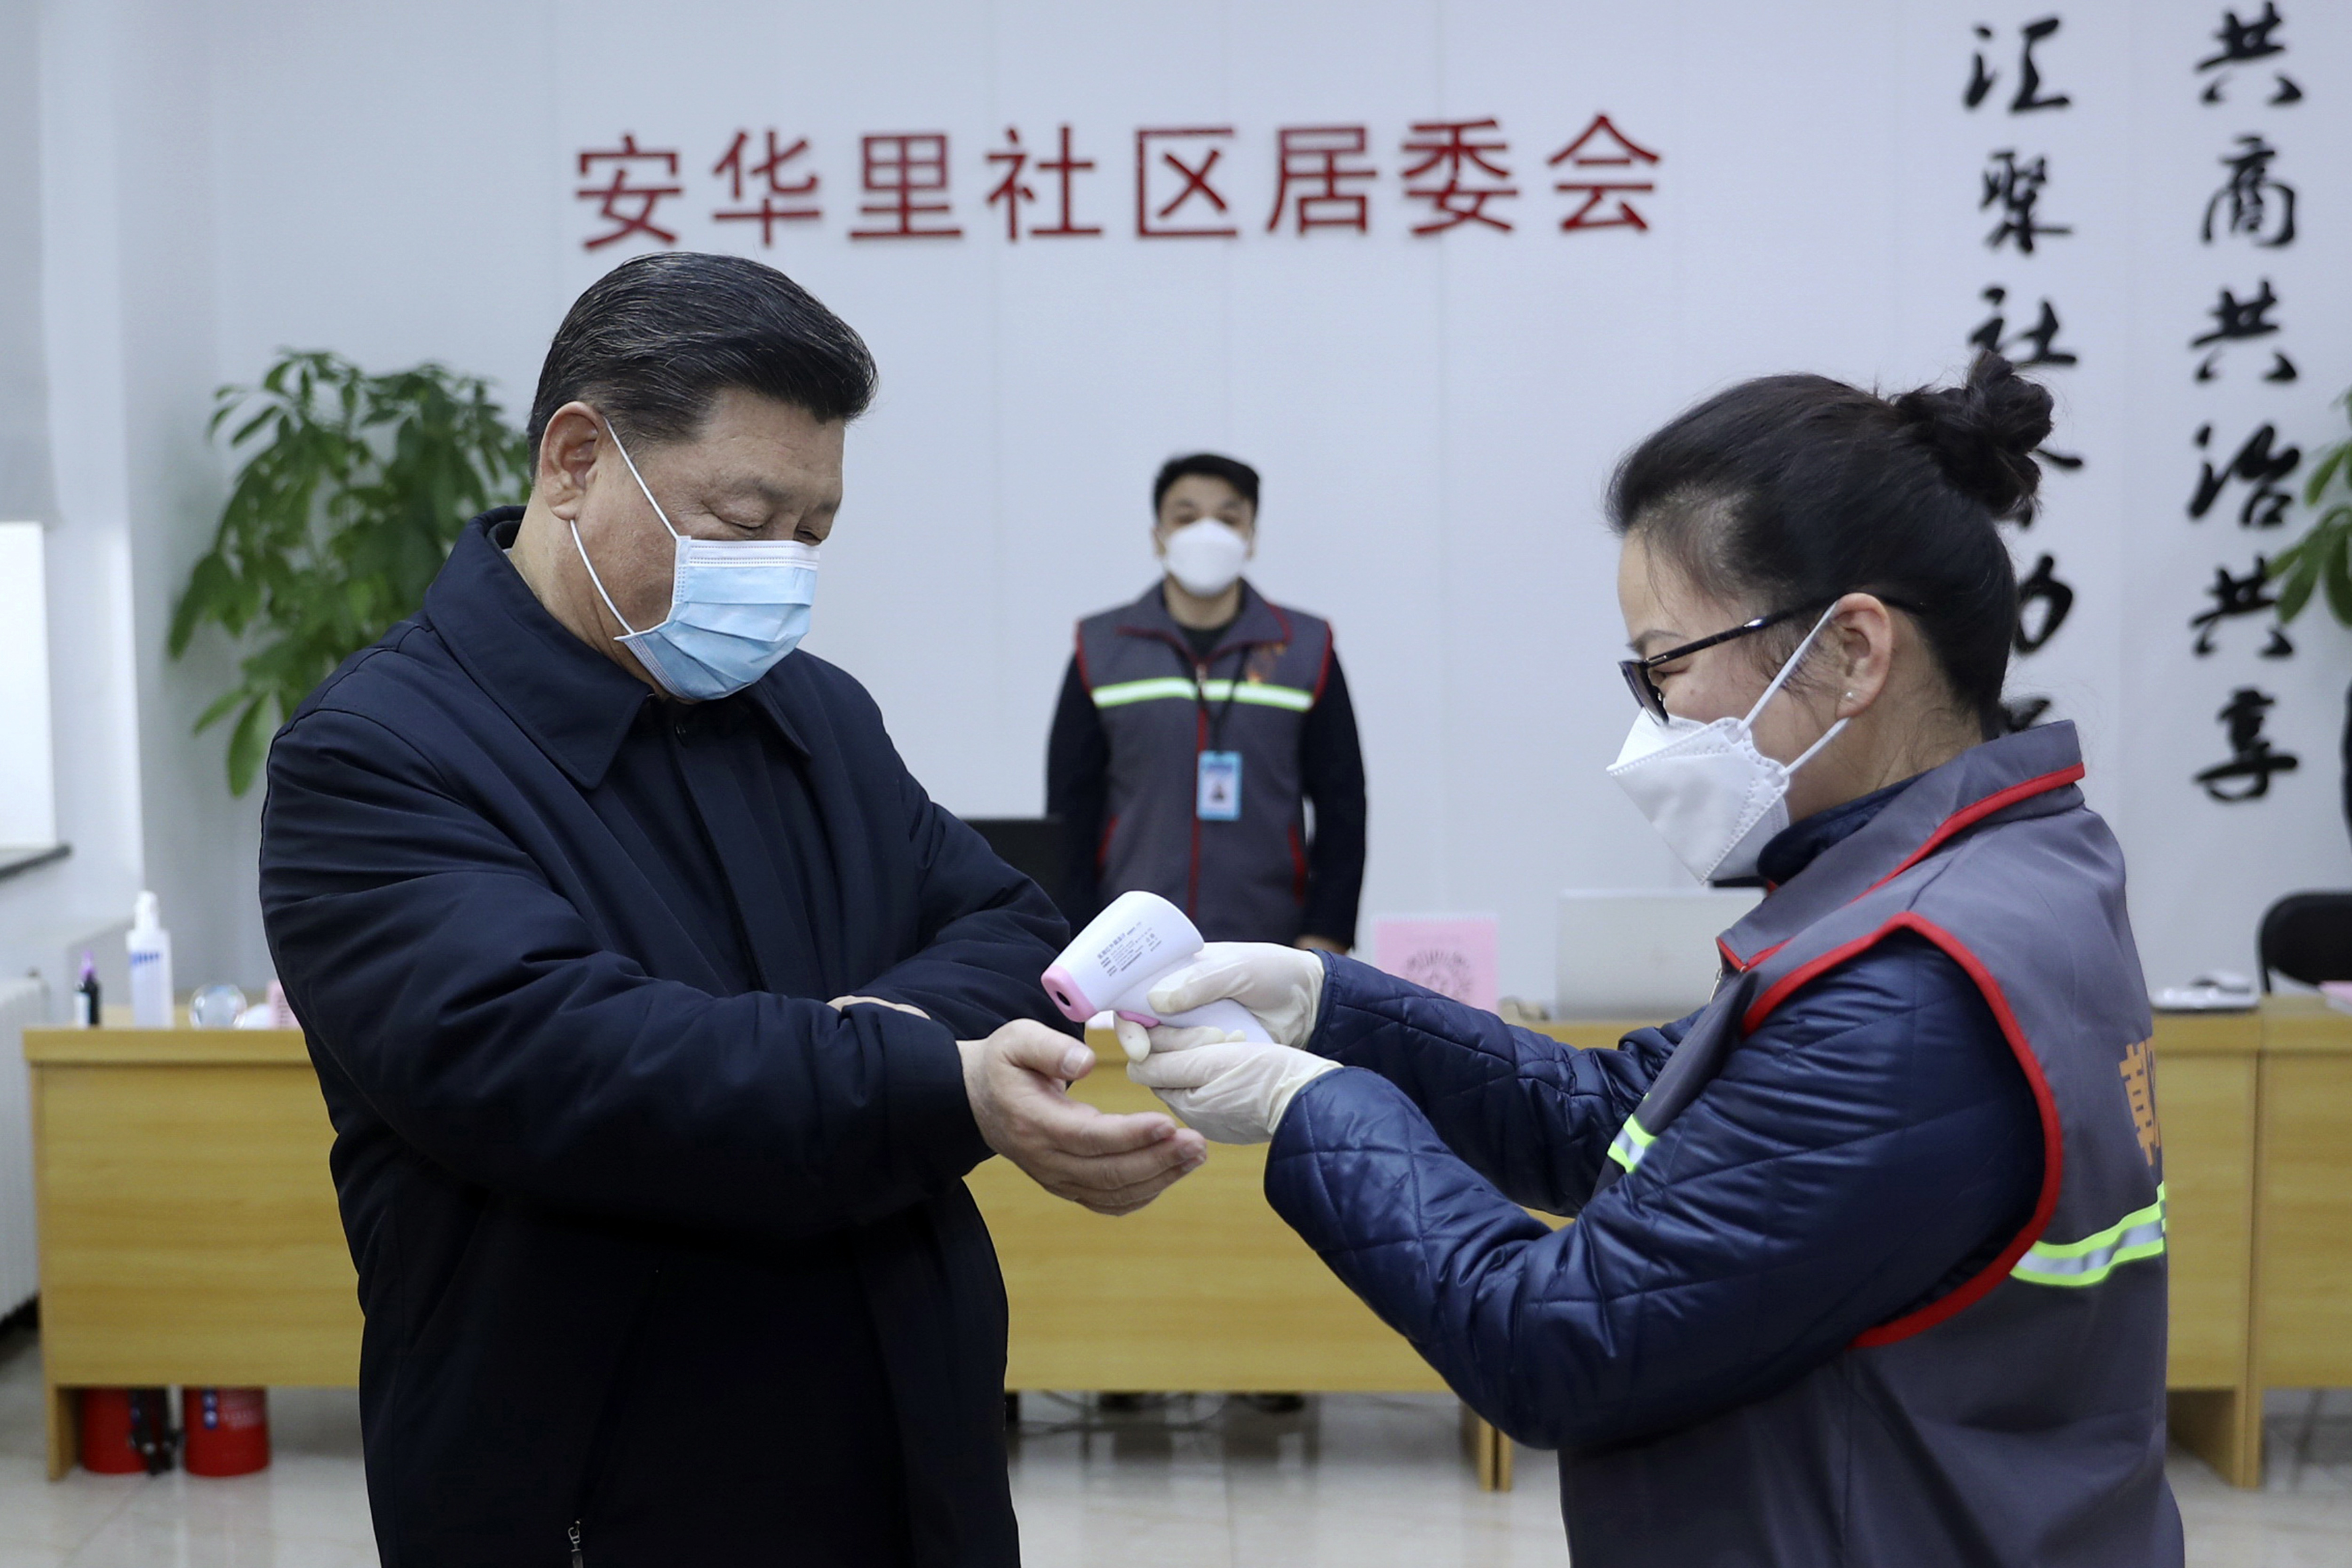 Chinese President Xi Jinping, left, wearing a protective face mask receives a temperature check.